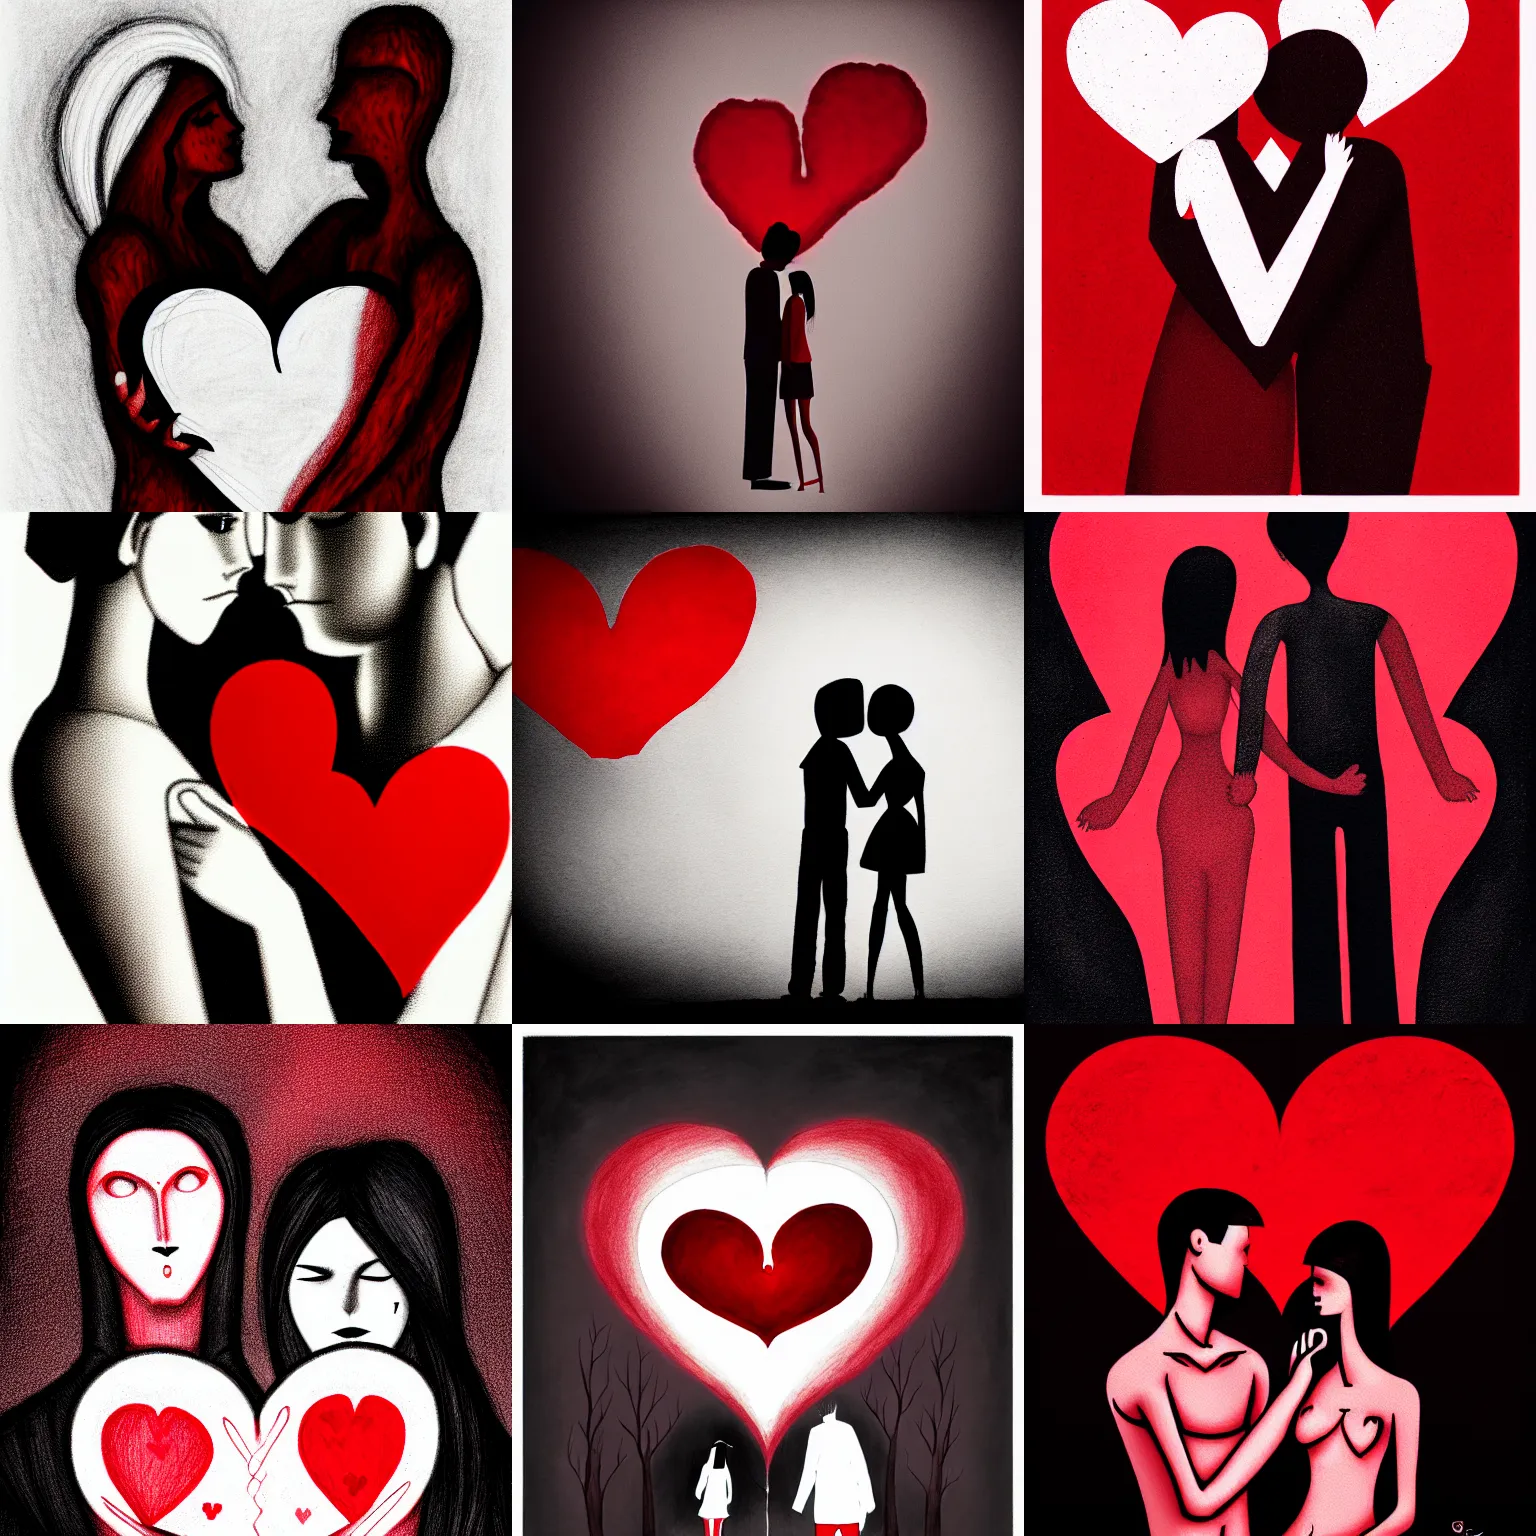 Prompt: couple (woman and man), several hearts, love, sadness, dark ambiance, concept by Godfrey Blow, featured on deviantart, drawing, sots art, lyco art, artwork, photoillustration, poster art, black and red